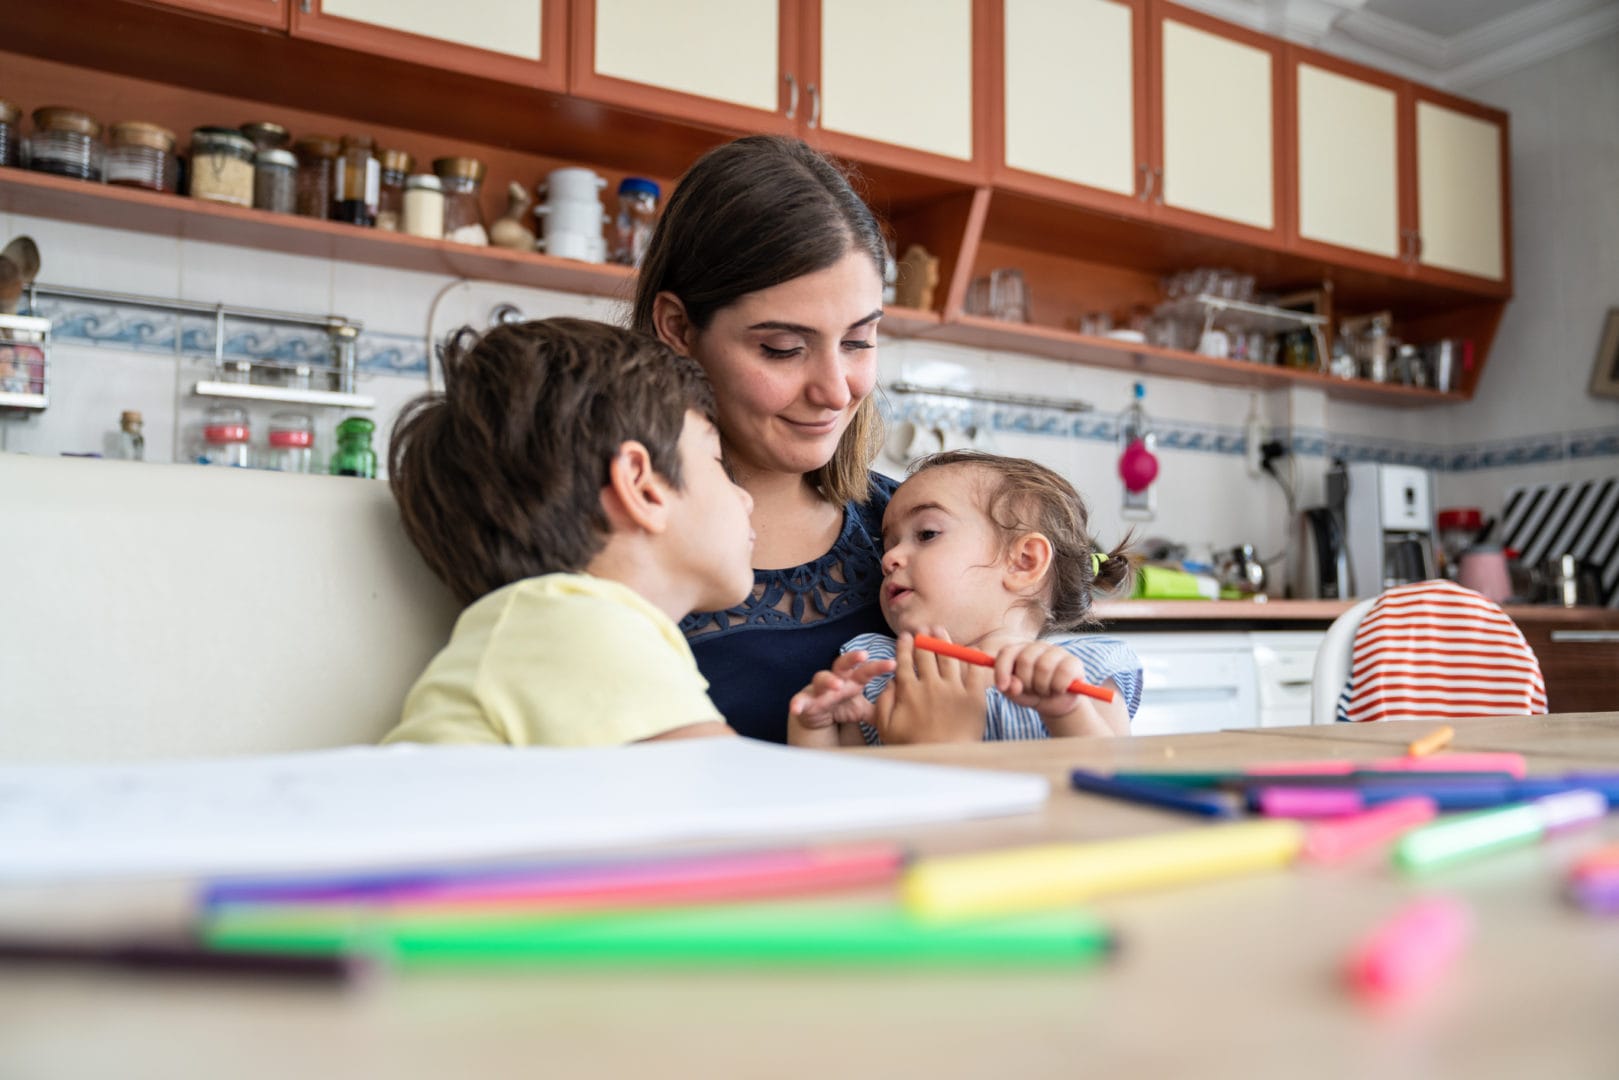 What to consider before allowing your nanny or sitter to bring their own child to work